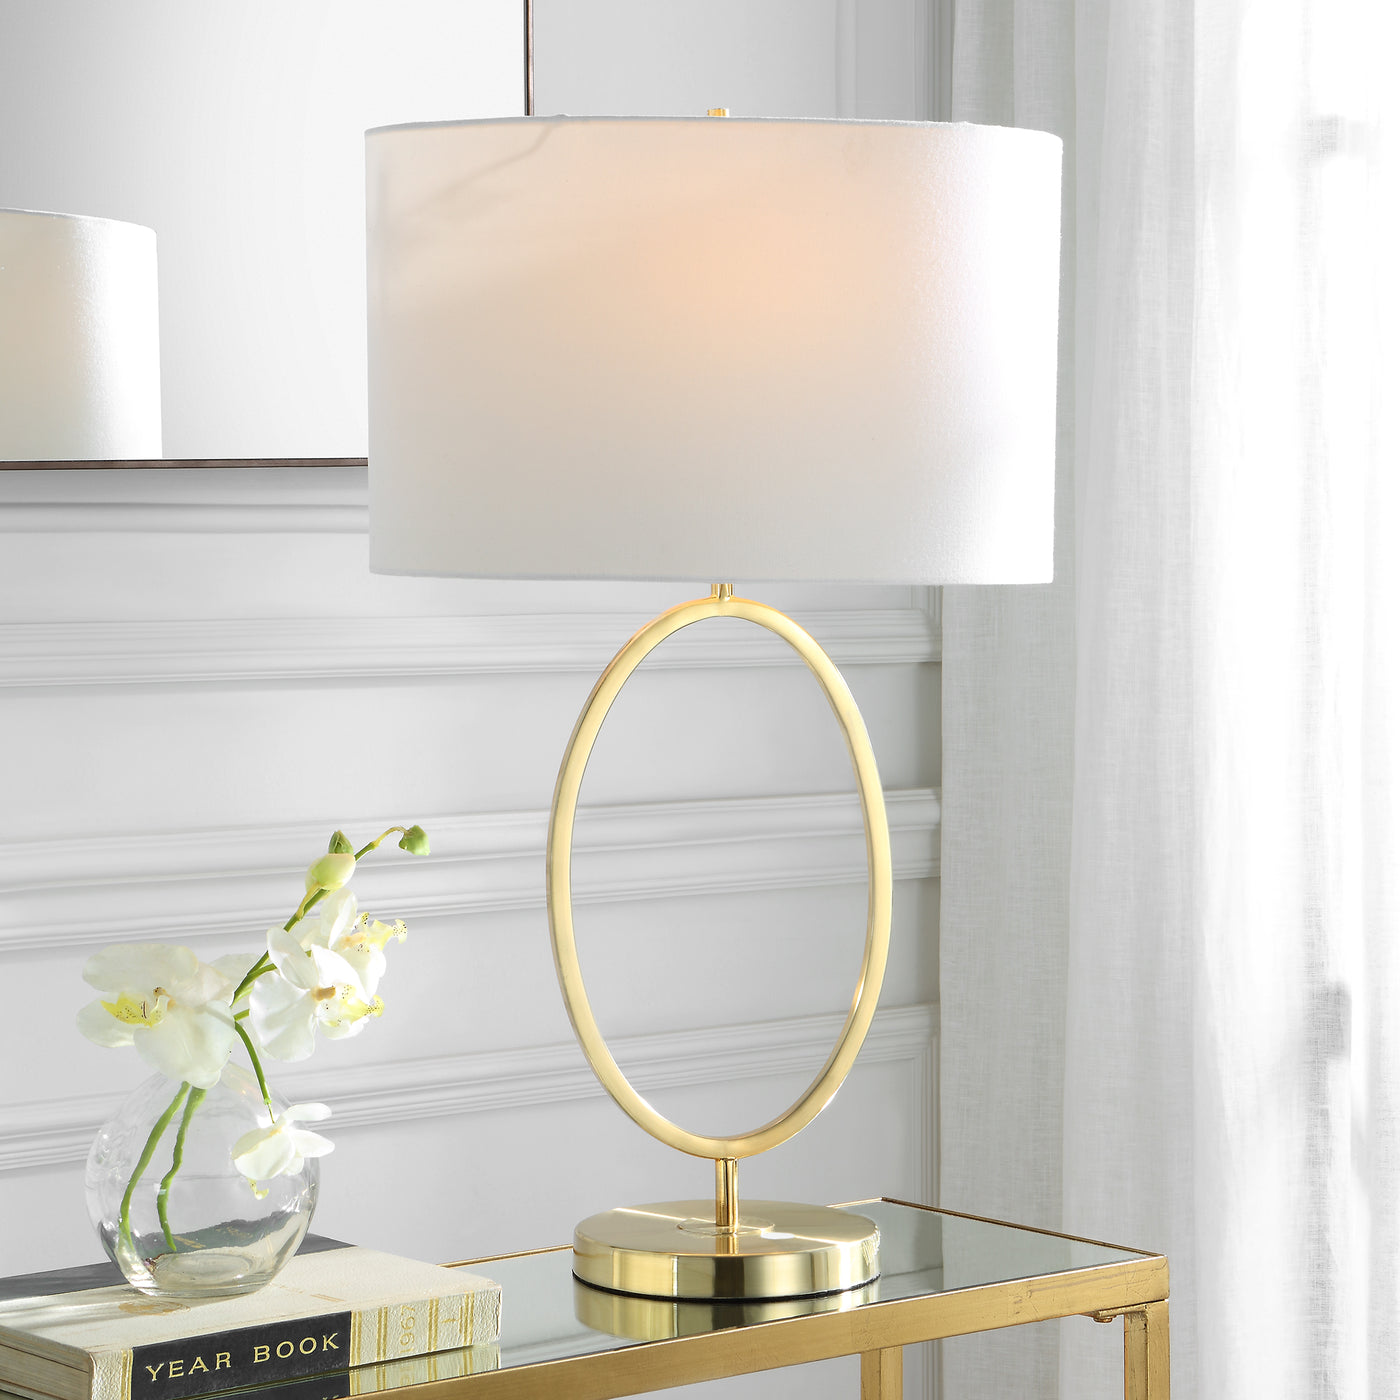 The Dubai Table Lamp with Golden Brass Oval Ring –